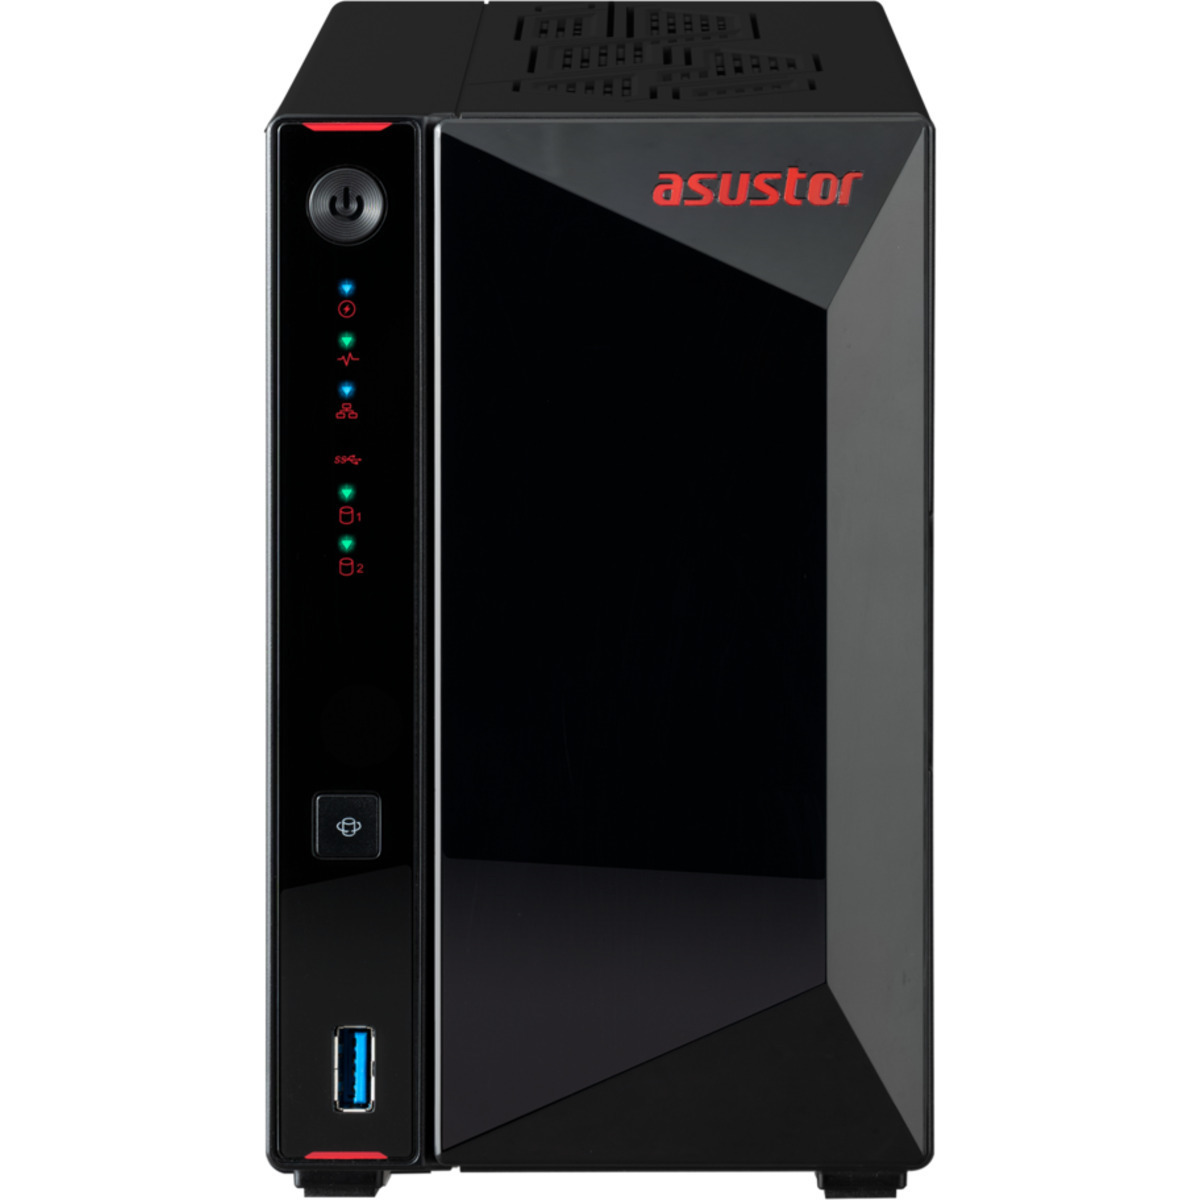 buy ASUSTOR Nimbustor 2 Gen2 AS5402T 32tb Desktop NAS - Network Attached Storage Device 2x16000gb Western Digital Ultrastar DC HC550 WUH721816ALE6L4 3.5 7200rpm SATA 6Gb/s HDD ENTERPRISE Class Drives Installed - Burn-In Tested - FREE RAM UPGRADE - nas headquarters buy network attached storage server device das new raid-5 free shipping simply usa Nimbustor 2 Gen2 AS5402T